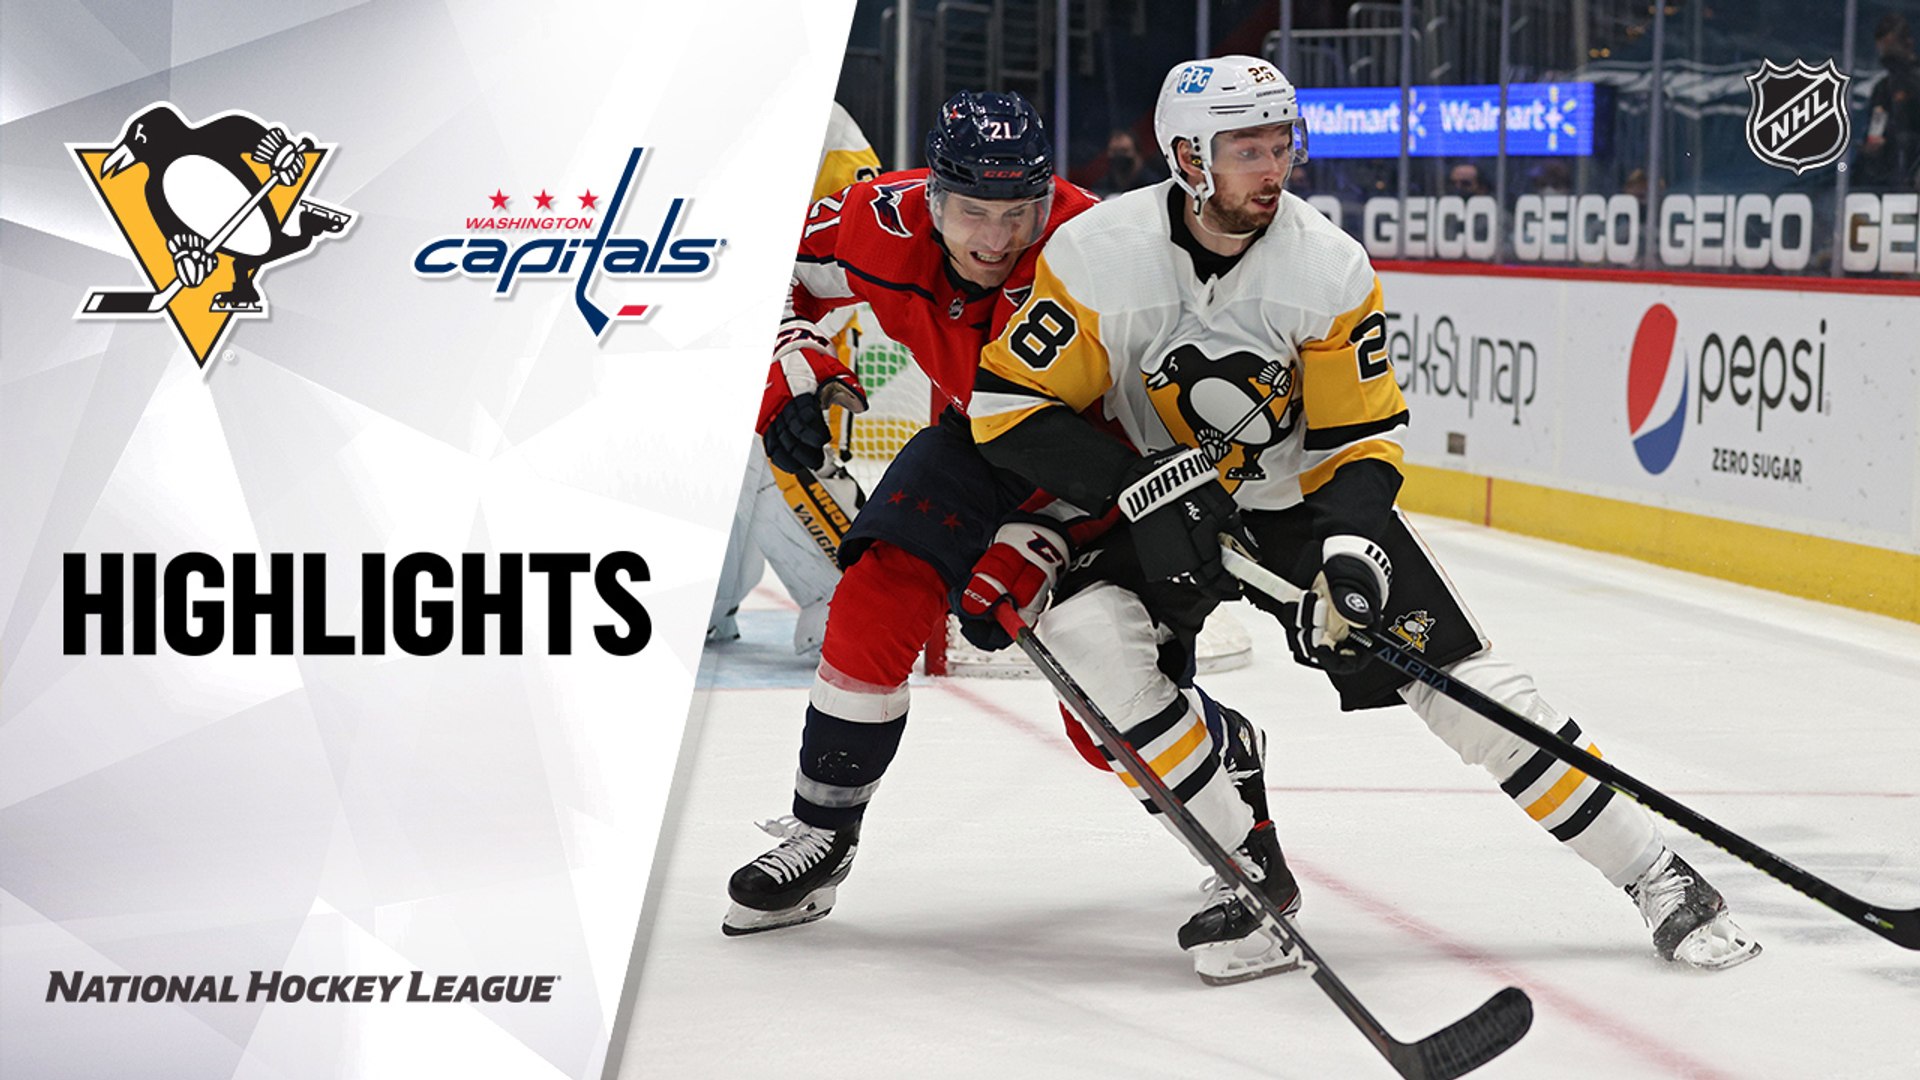 Penguins @ Capitals 4/29/21 | NHL Highlights - video Dailymotion